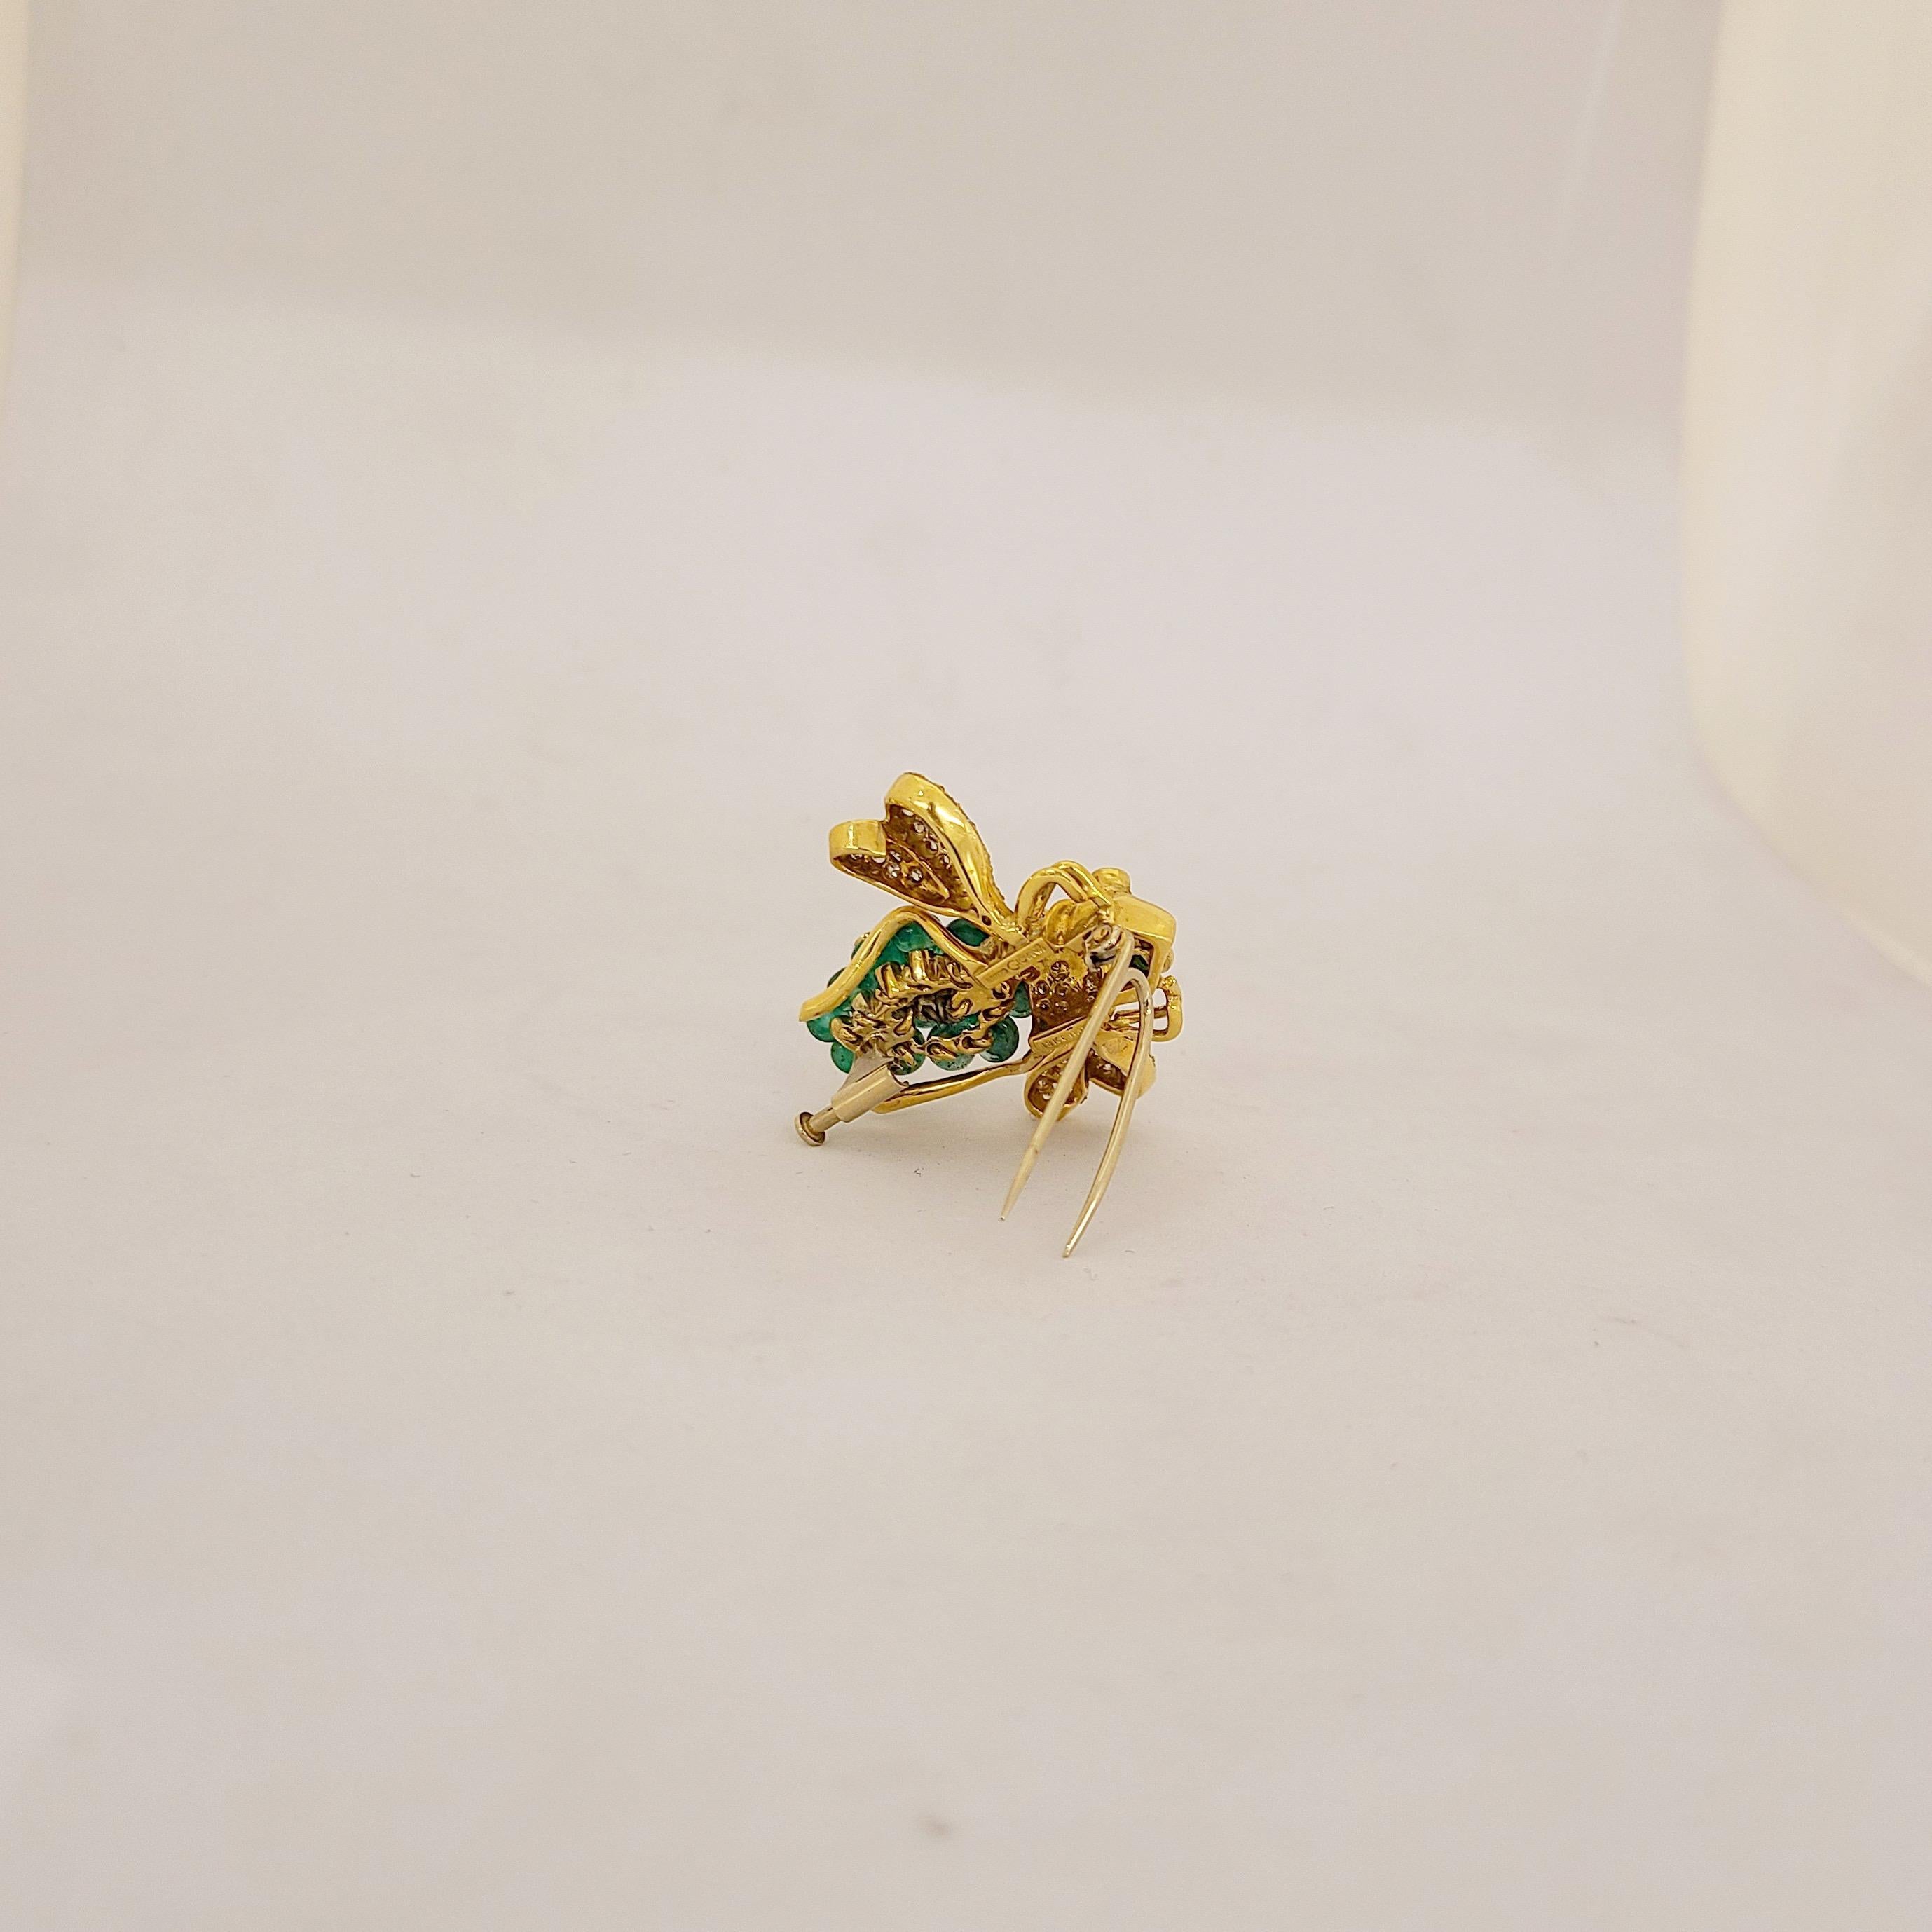 The house of Giovane has forged its name with exquisite jewelry made in one of Italy’s oldest and most esteemed workshops.
This adorable bee brooch is the perfect example of their whimsical /classical workmanship.
The 18 karat yellow gold bee is set